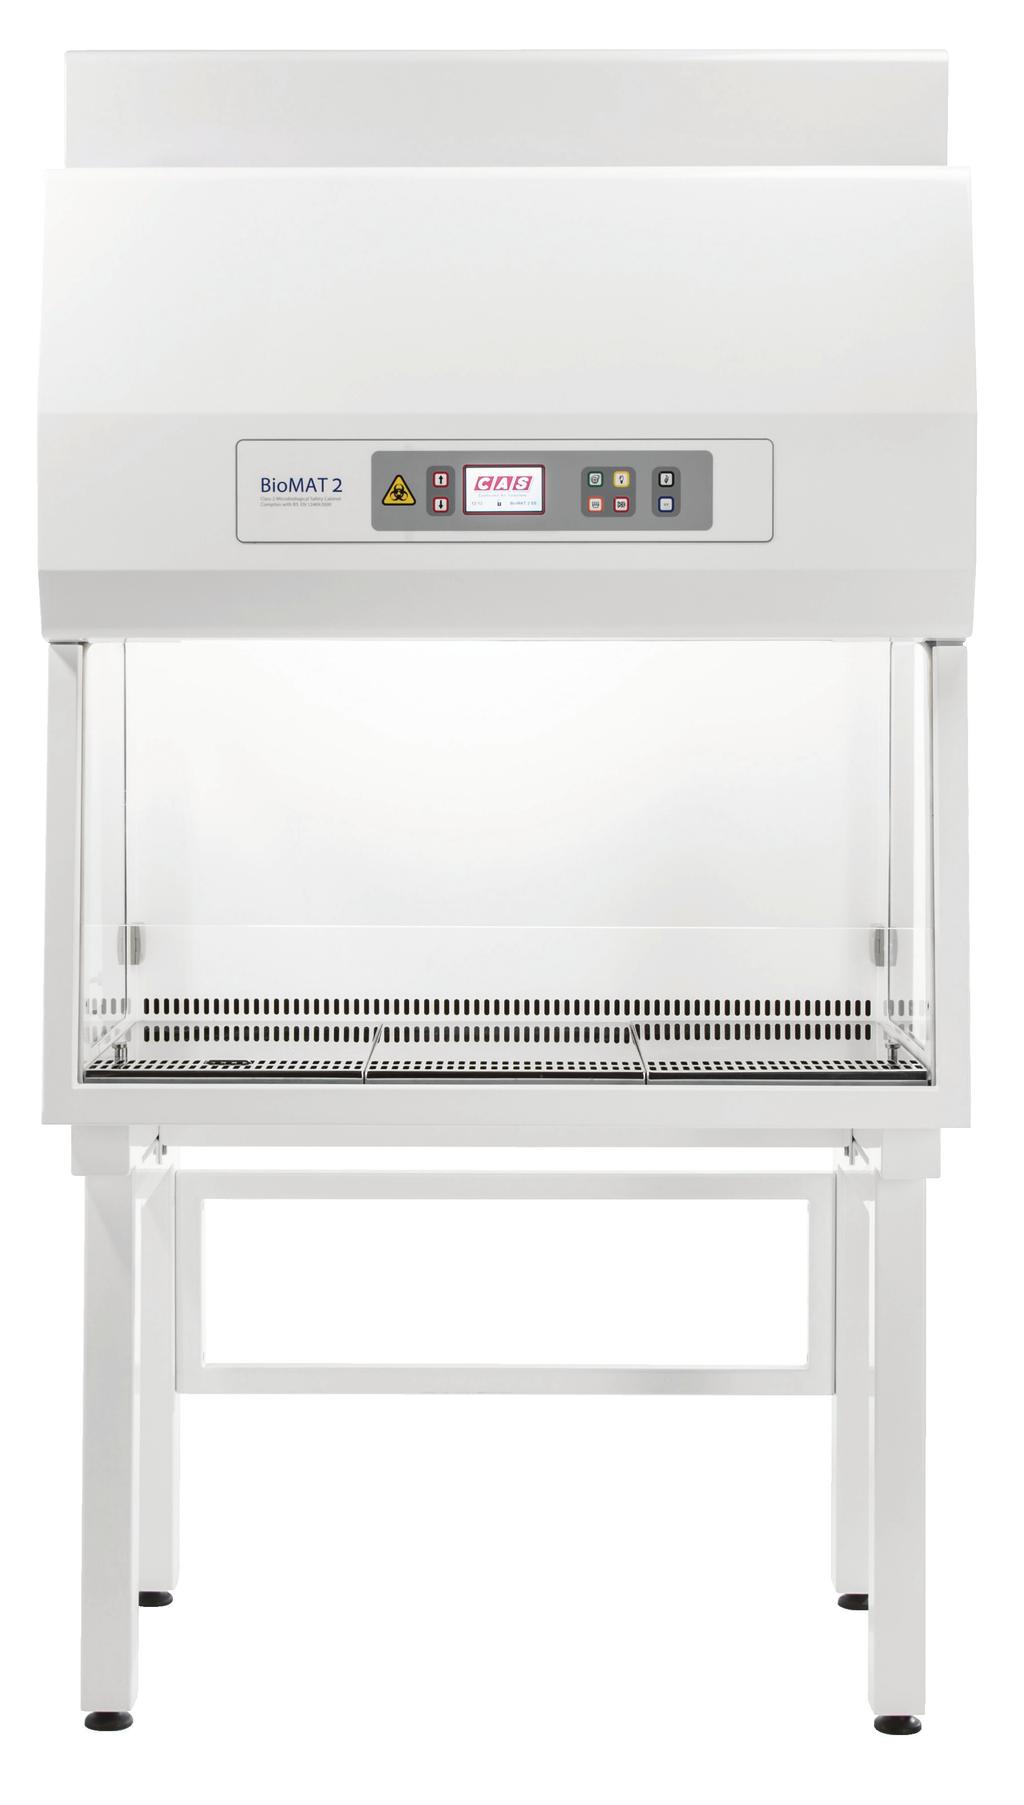 BioMAT 2 and BioMAT 2-S2 Class 2 Microbiological Safety Cabinets Significant upgrades make the new BioMAT 2 the most simple, safe, quiet and efficient model to date The 6th